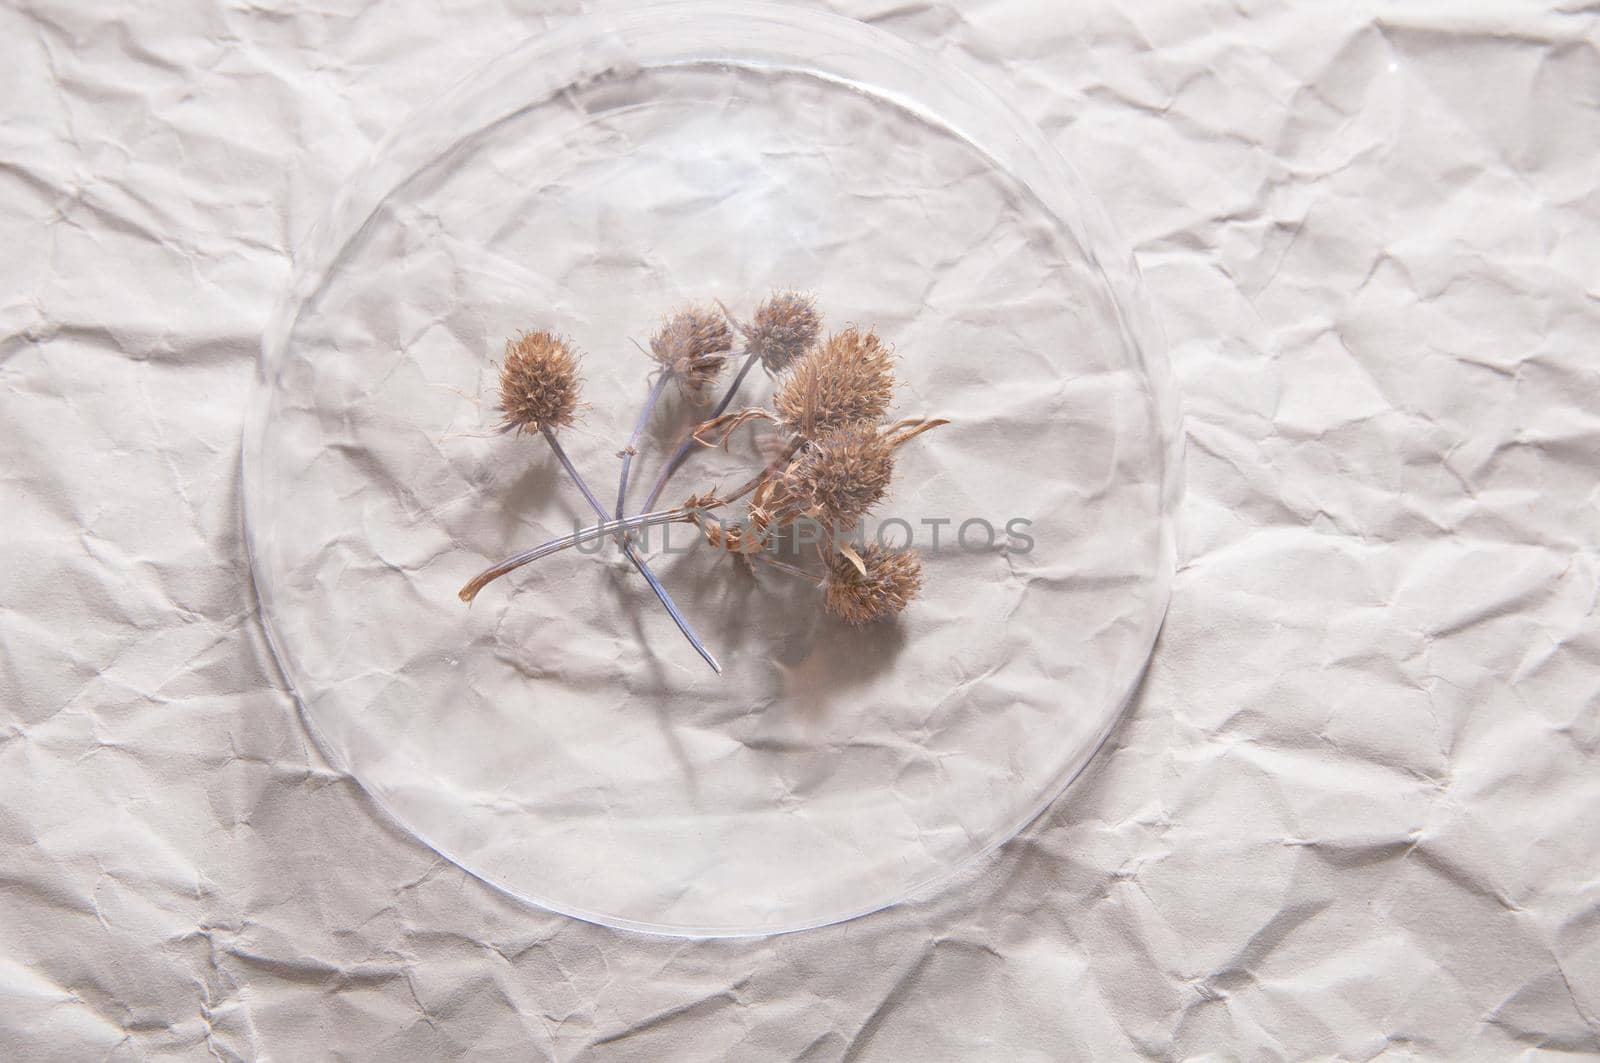 wild flower thistle under a glass dome on gray rumpled background